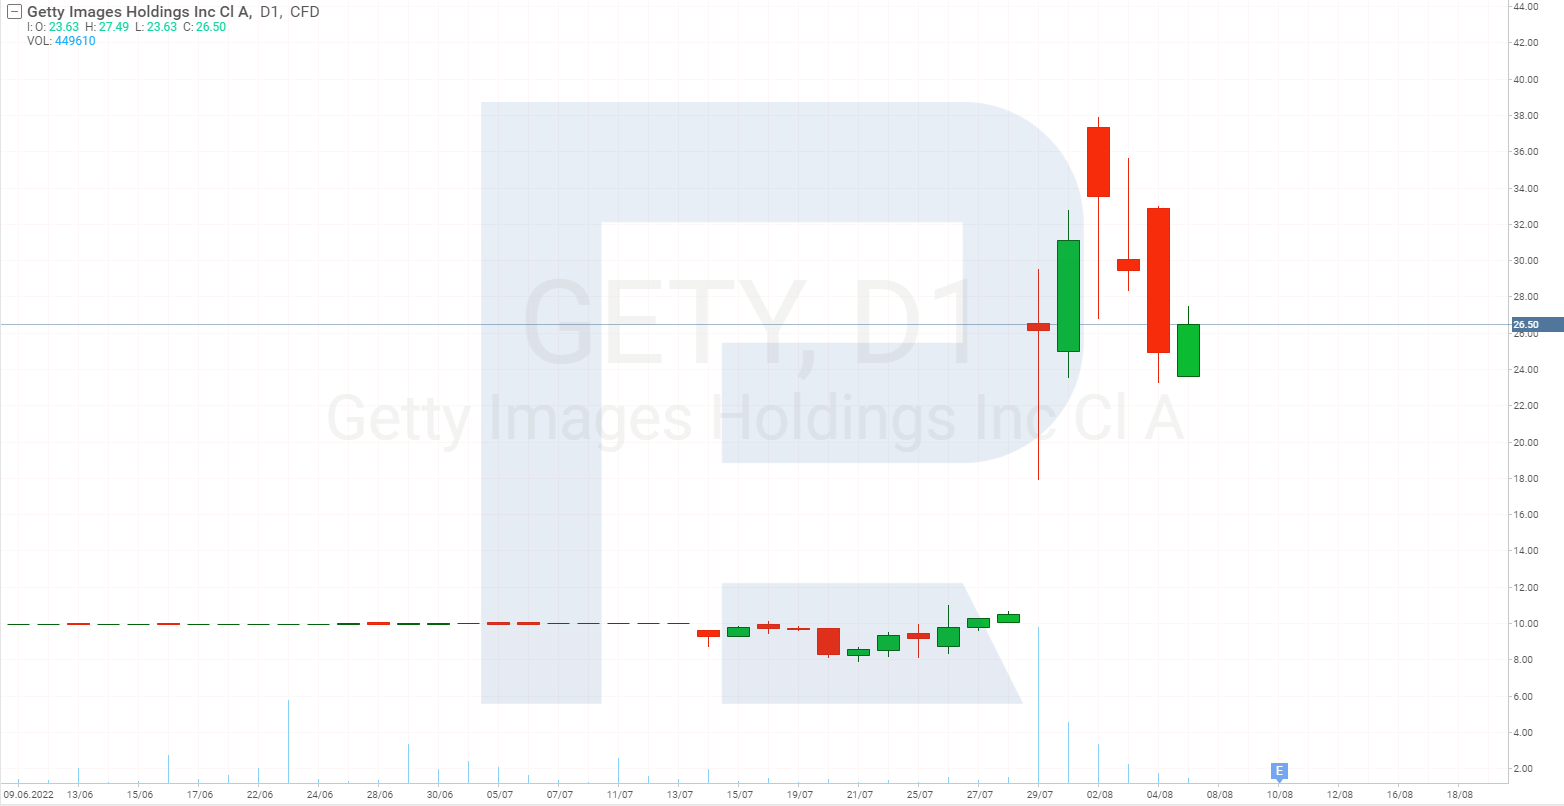 Share price chart of Getty Images Holdings